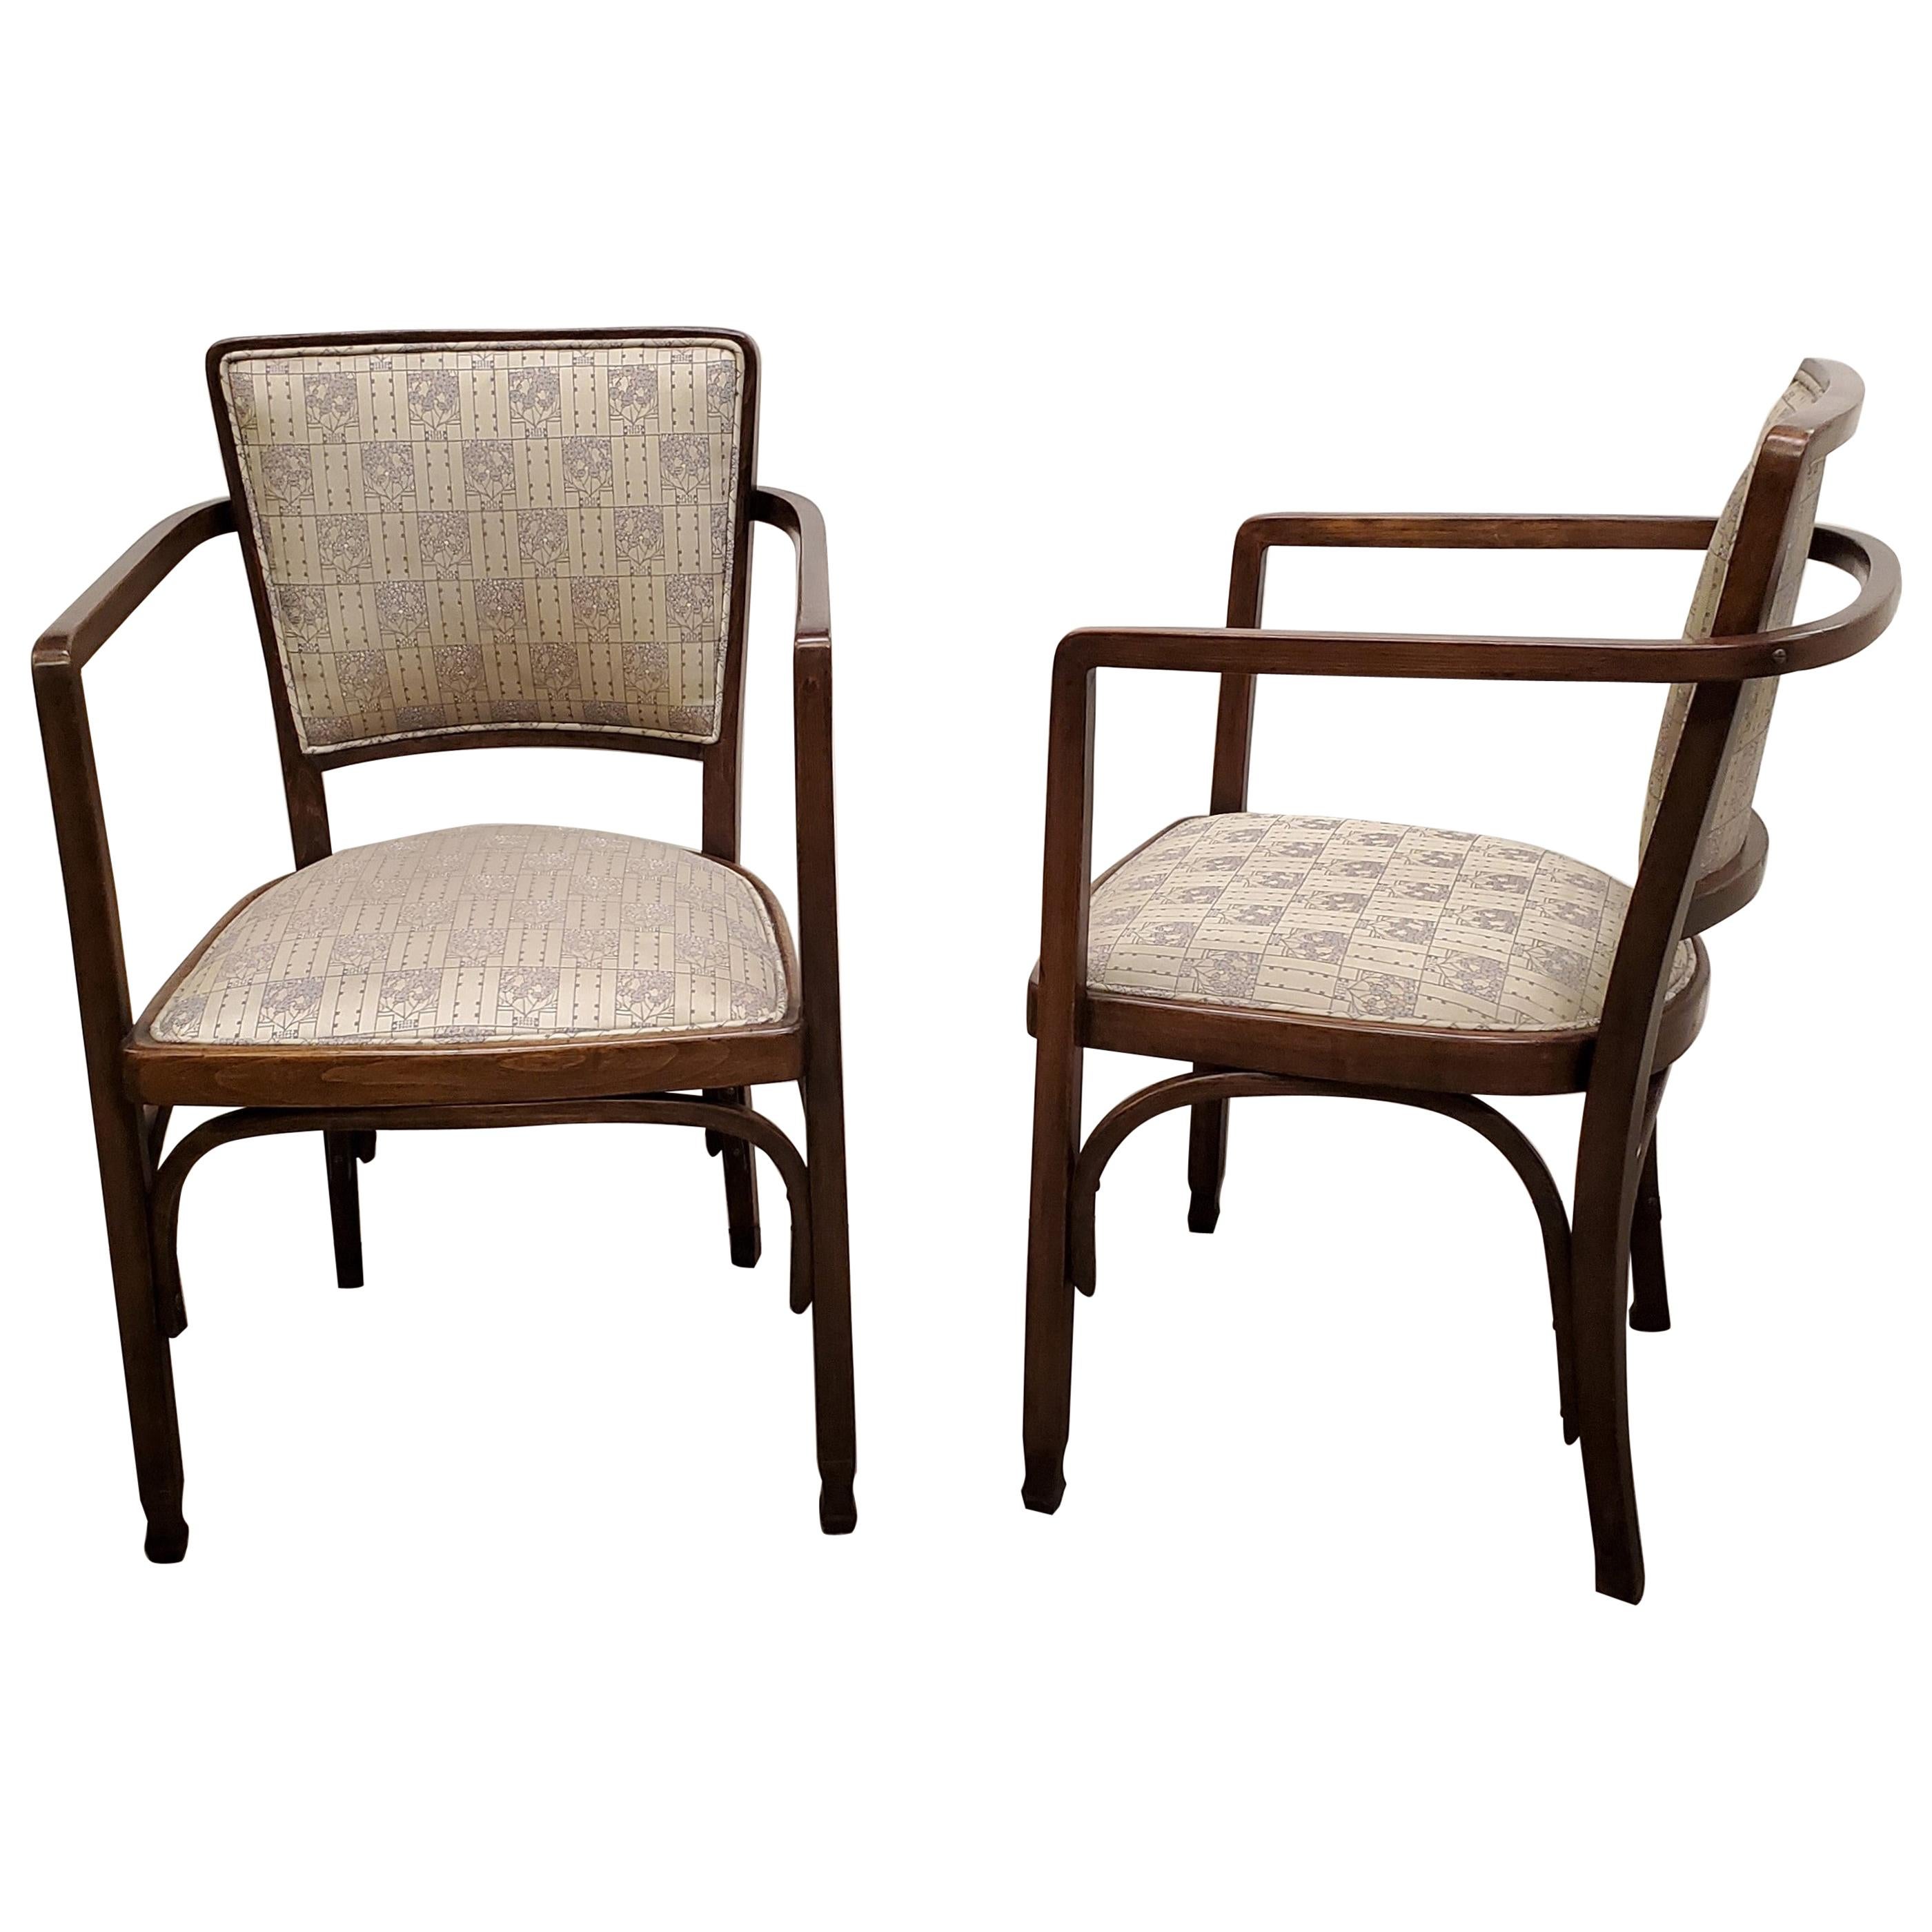 Pair of Austrian Secessionist Side Armchairs by Koloman Moser for J & J Kohn